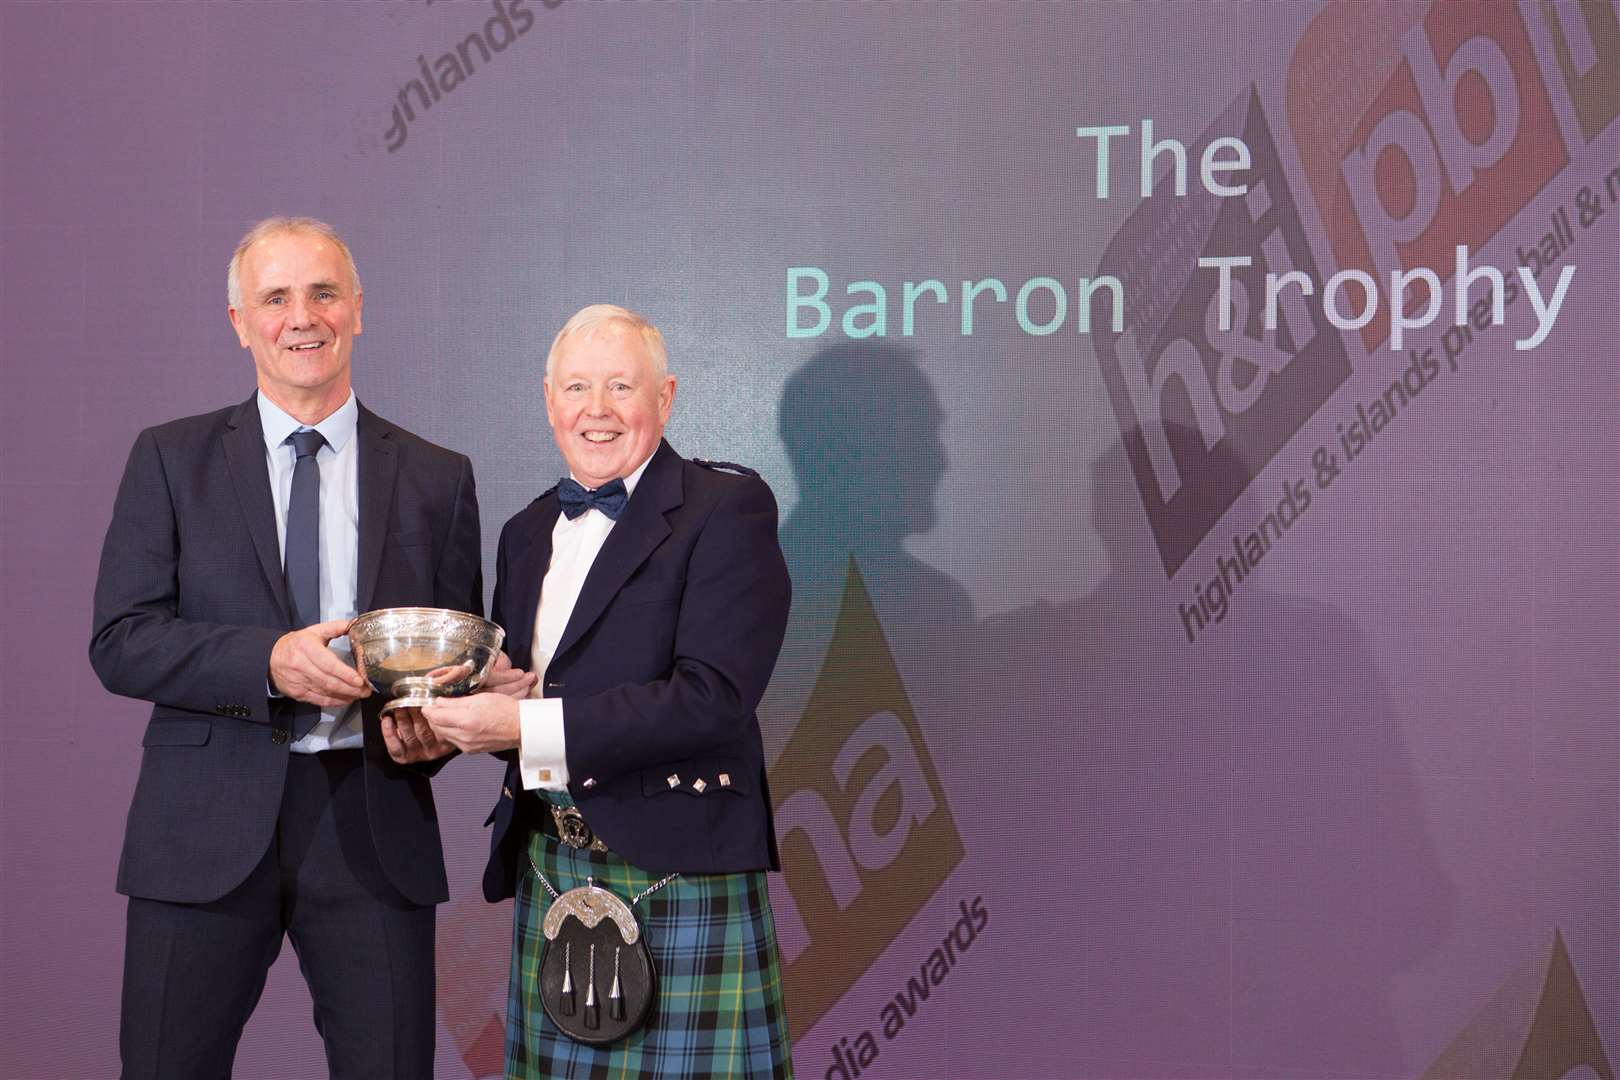 Iain Grant (left) receiving the Barron Trophy from Gordon Fyfe, chairman of the Highlands and Islands Media Awards, at Friday's event in Inverness. Picture: Alison White